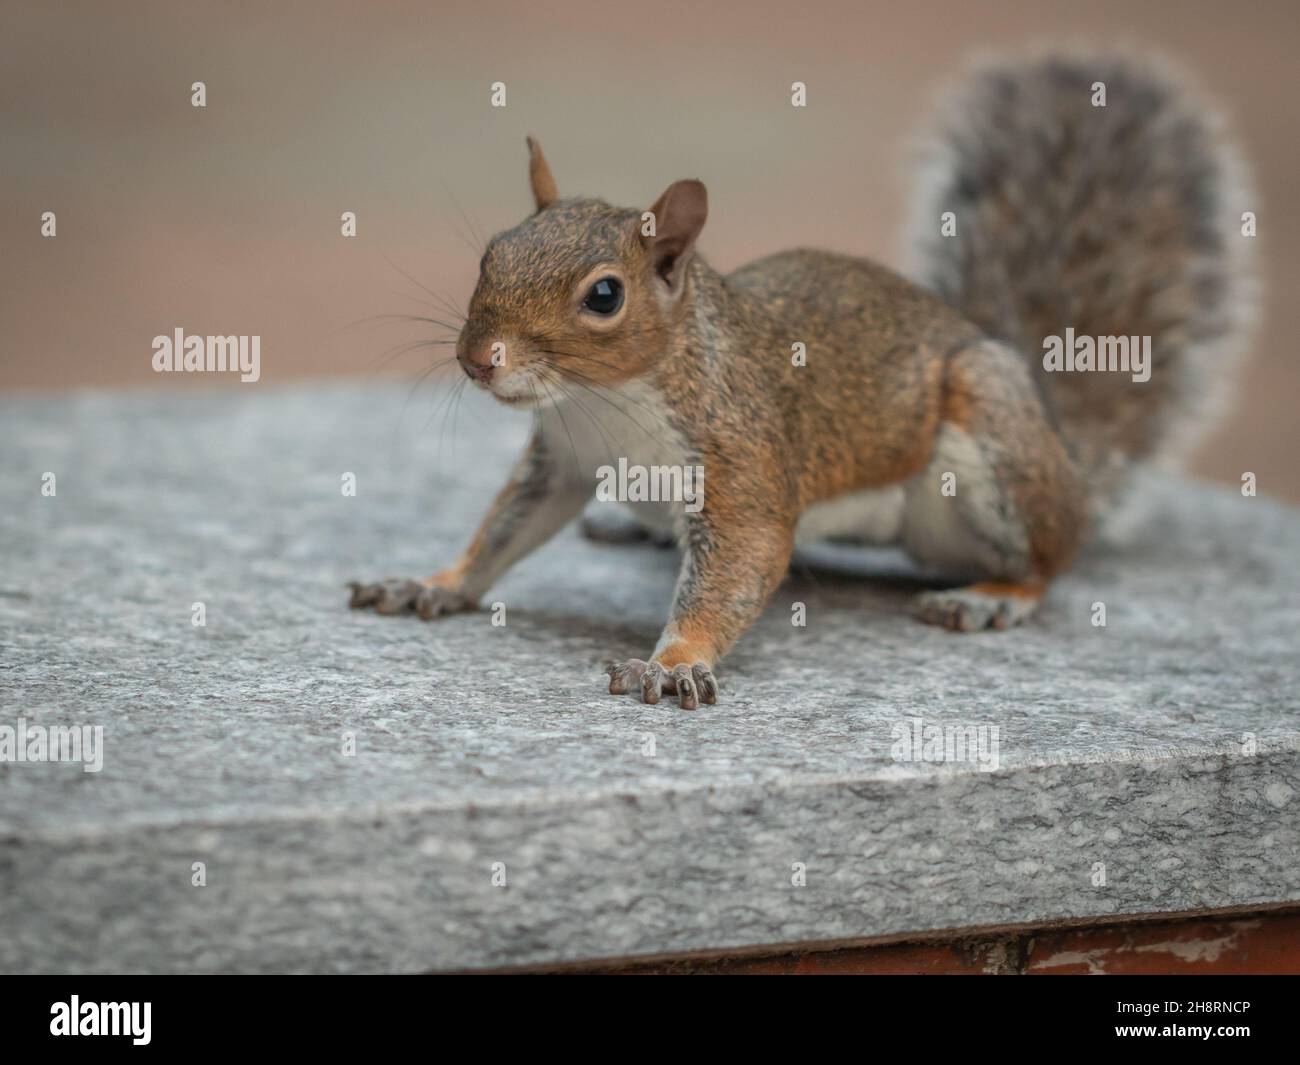 close-up portrait of gray squirrel Stock Photo